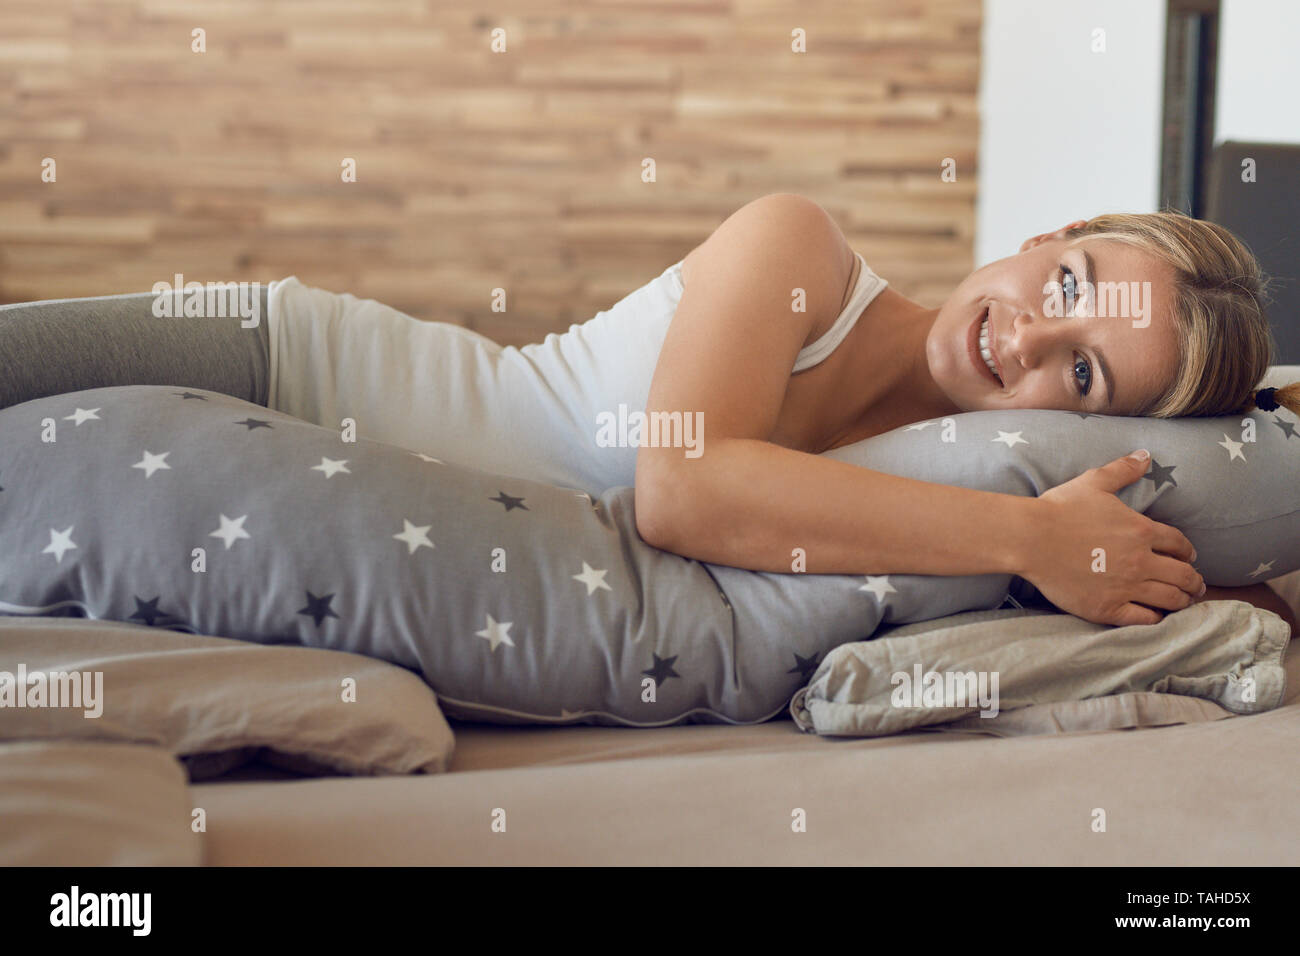 Happy healthy young pregnant woman resting on a bed using a special long pillow as a support looking at the camera with a lovely friendly smile Stock Photo